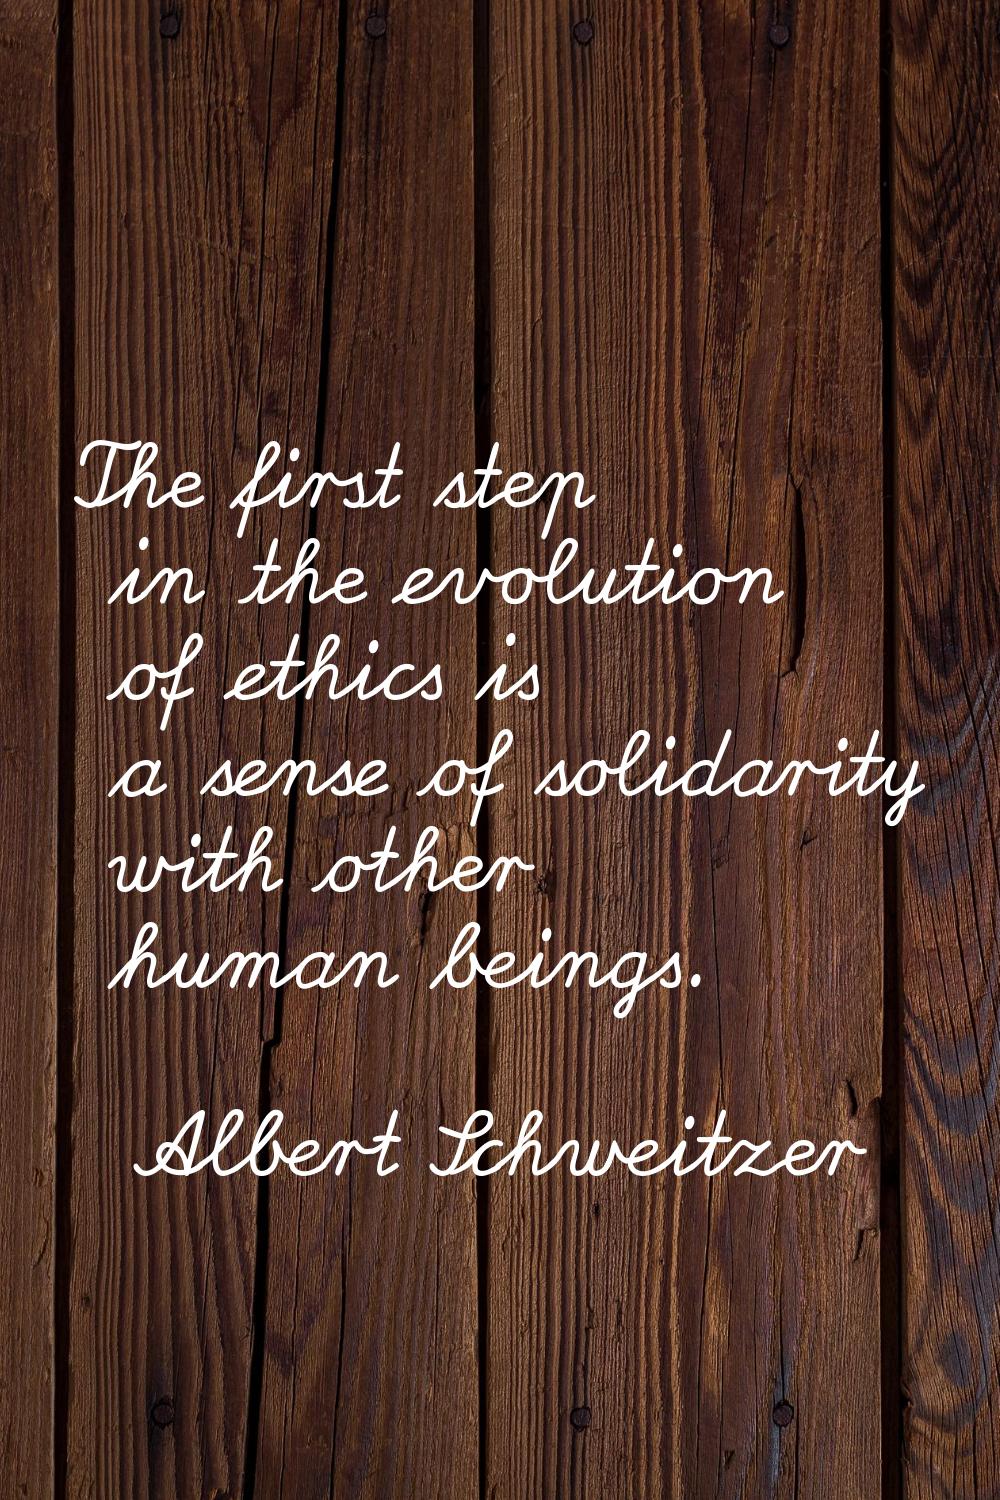 The first step in the evolution of ethics is a sense of solidarity with other human beings.